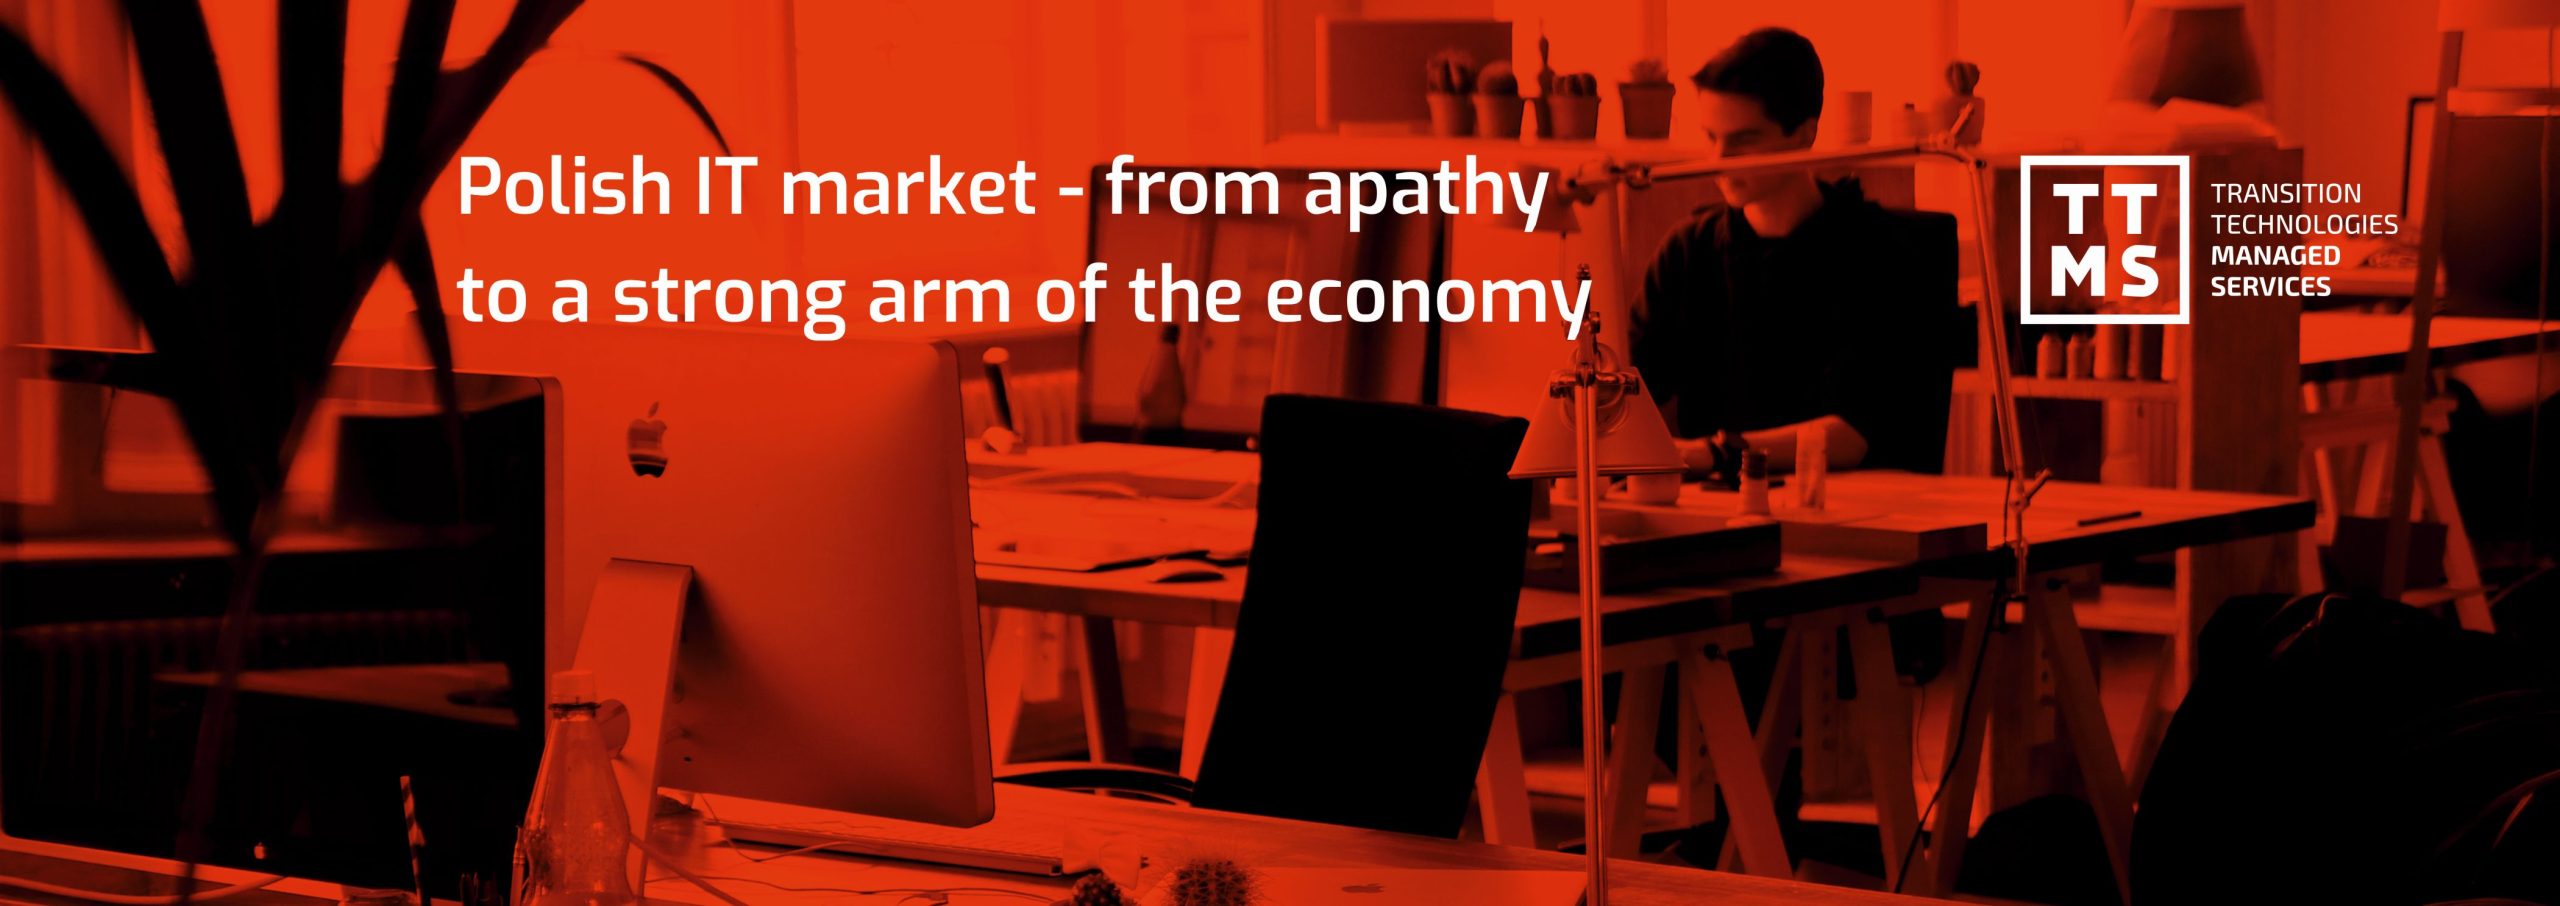 Polish IT market – from apathy to a strong arm of the economy